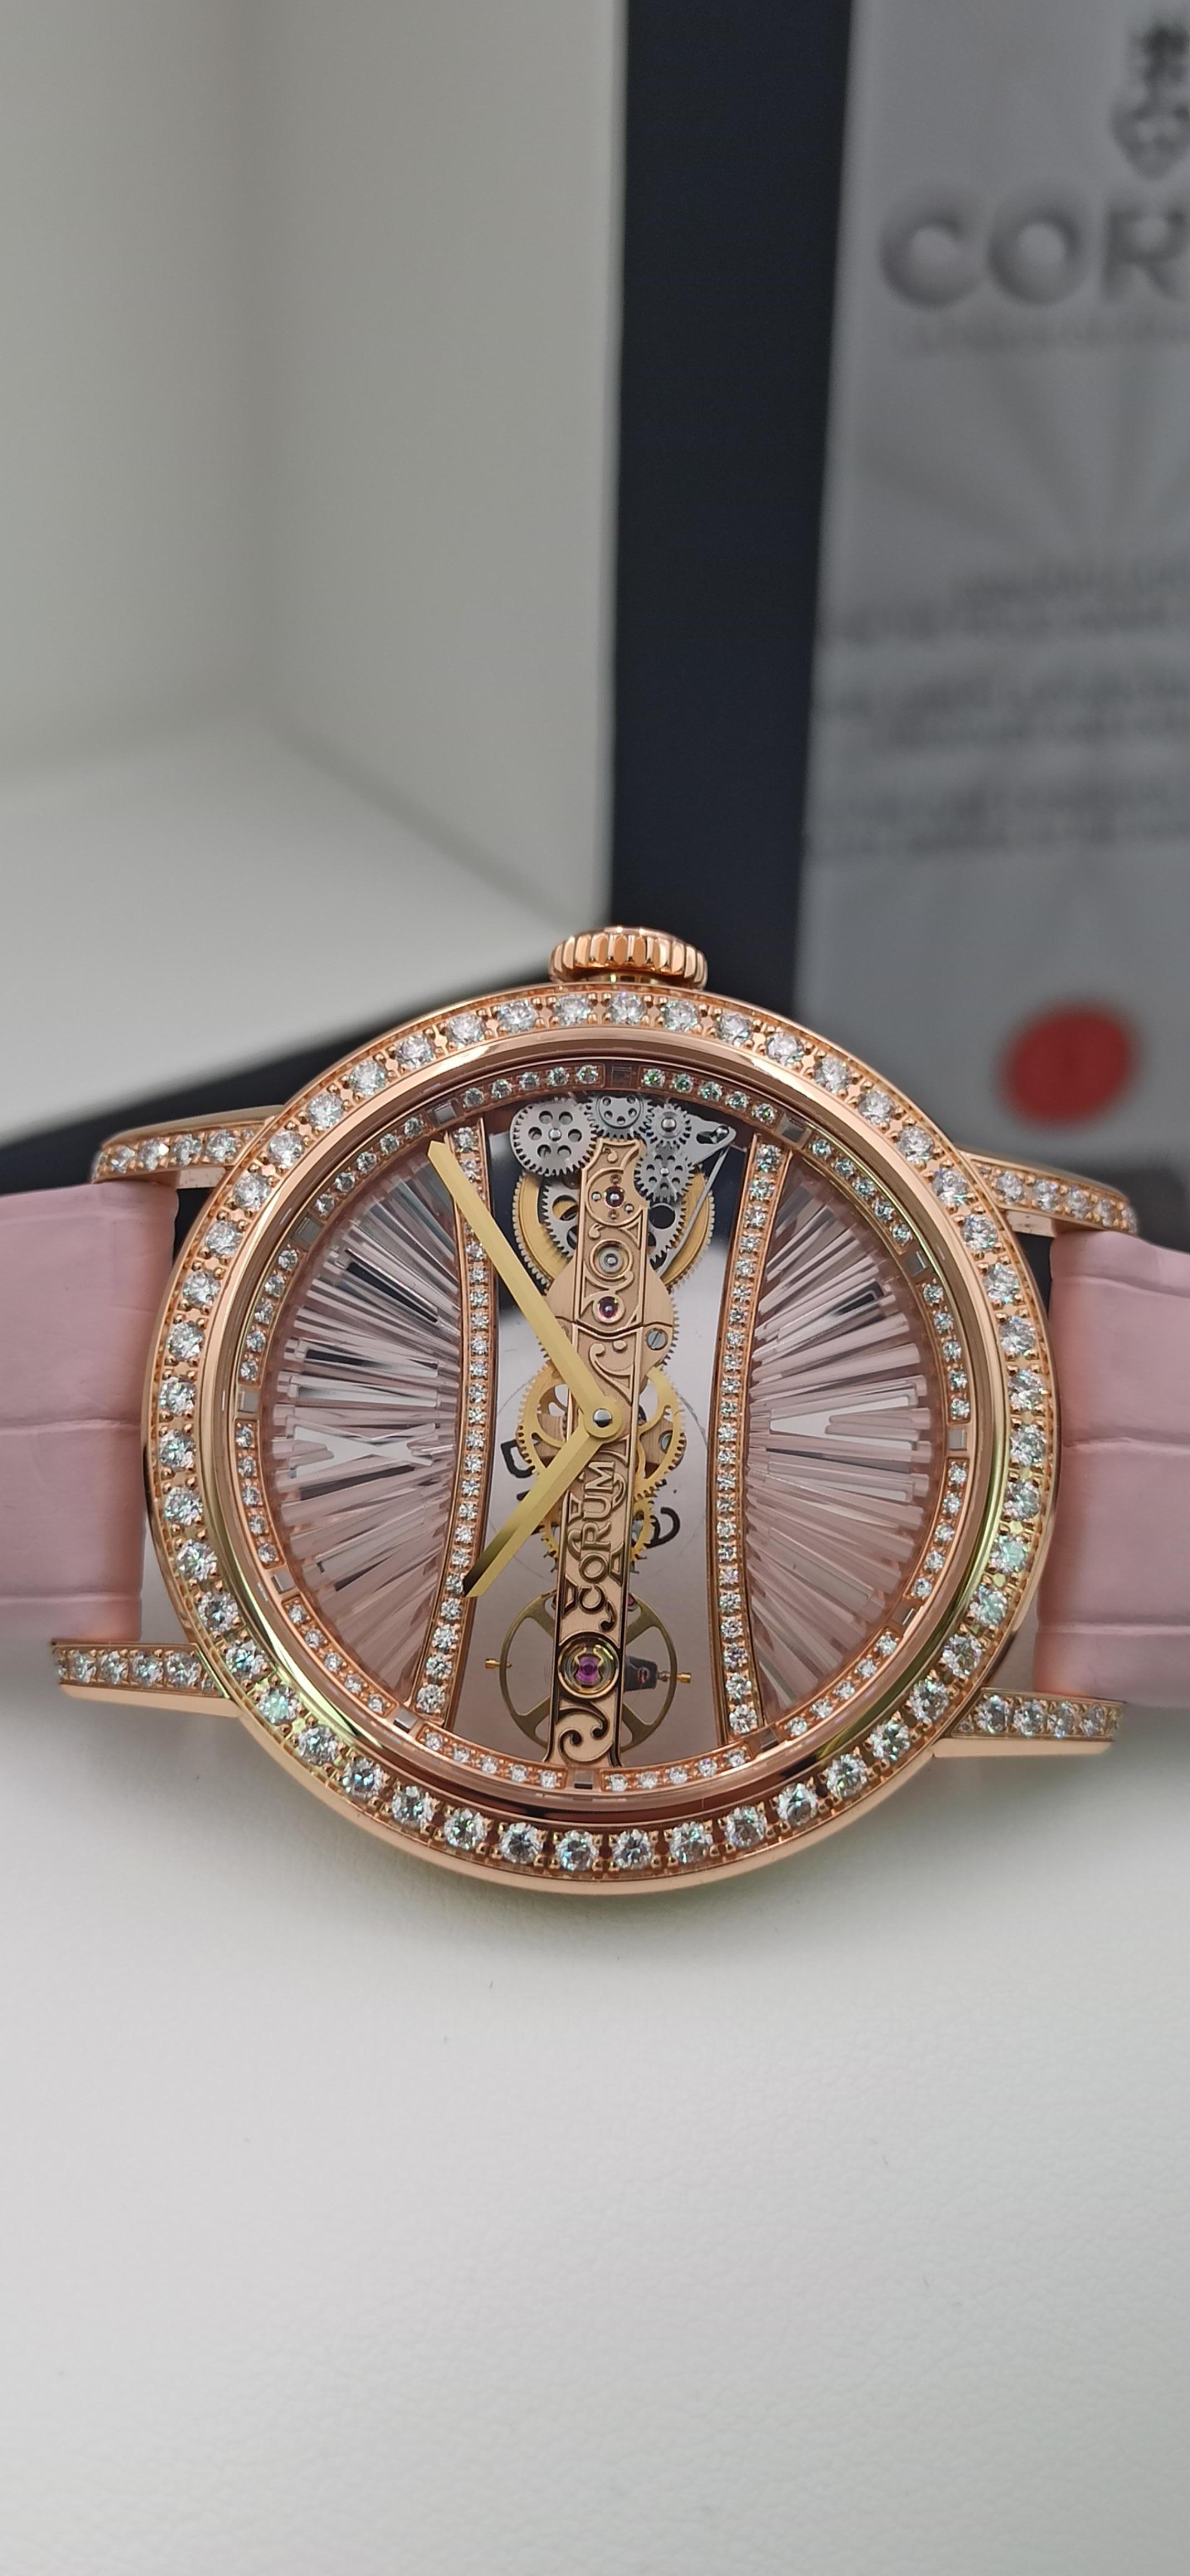 Corum Golden Bridge, round 39mm case,  18kt rose gold case and deployment buckle, 
complete with Box, Papers, Certificate.

Really an amazing lady wrist watch, that includes all the exclusivity, and perfection of the High End hand made Corum swiss